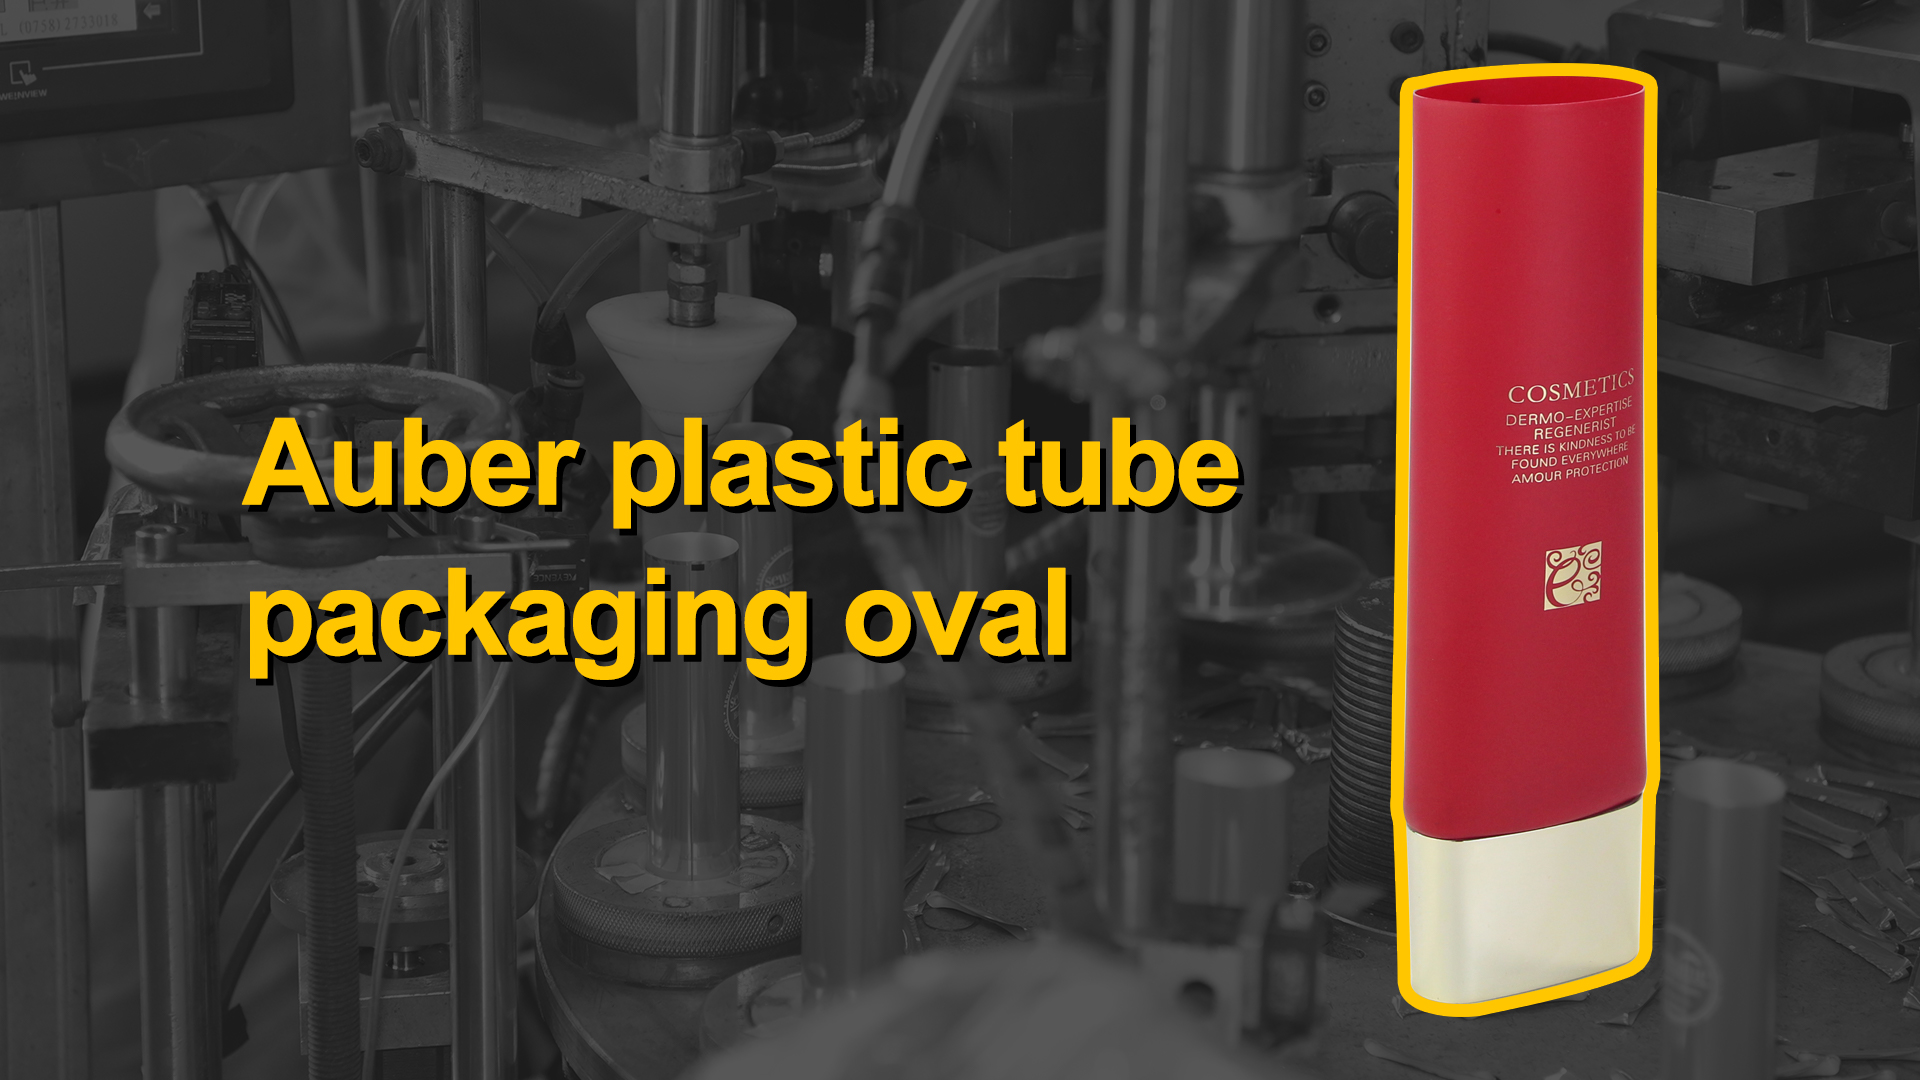 China plastic tube packaging oval manufacturers - Auber Packaging